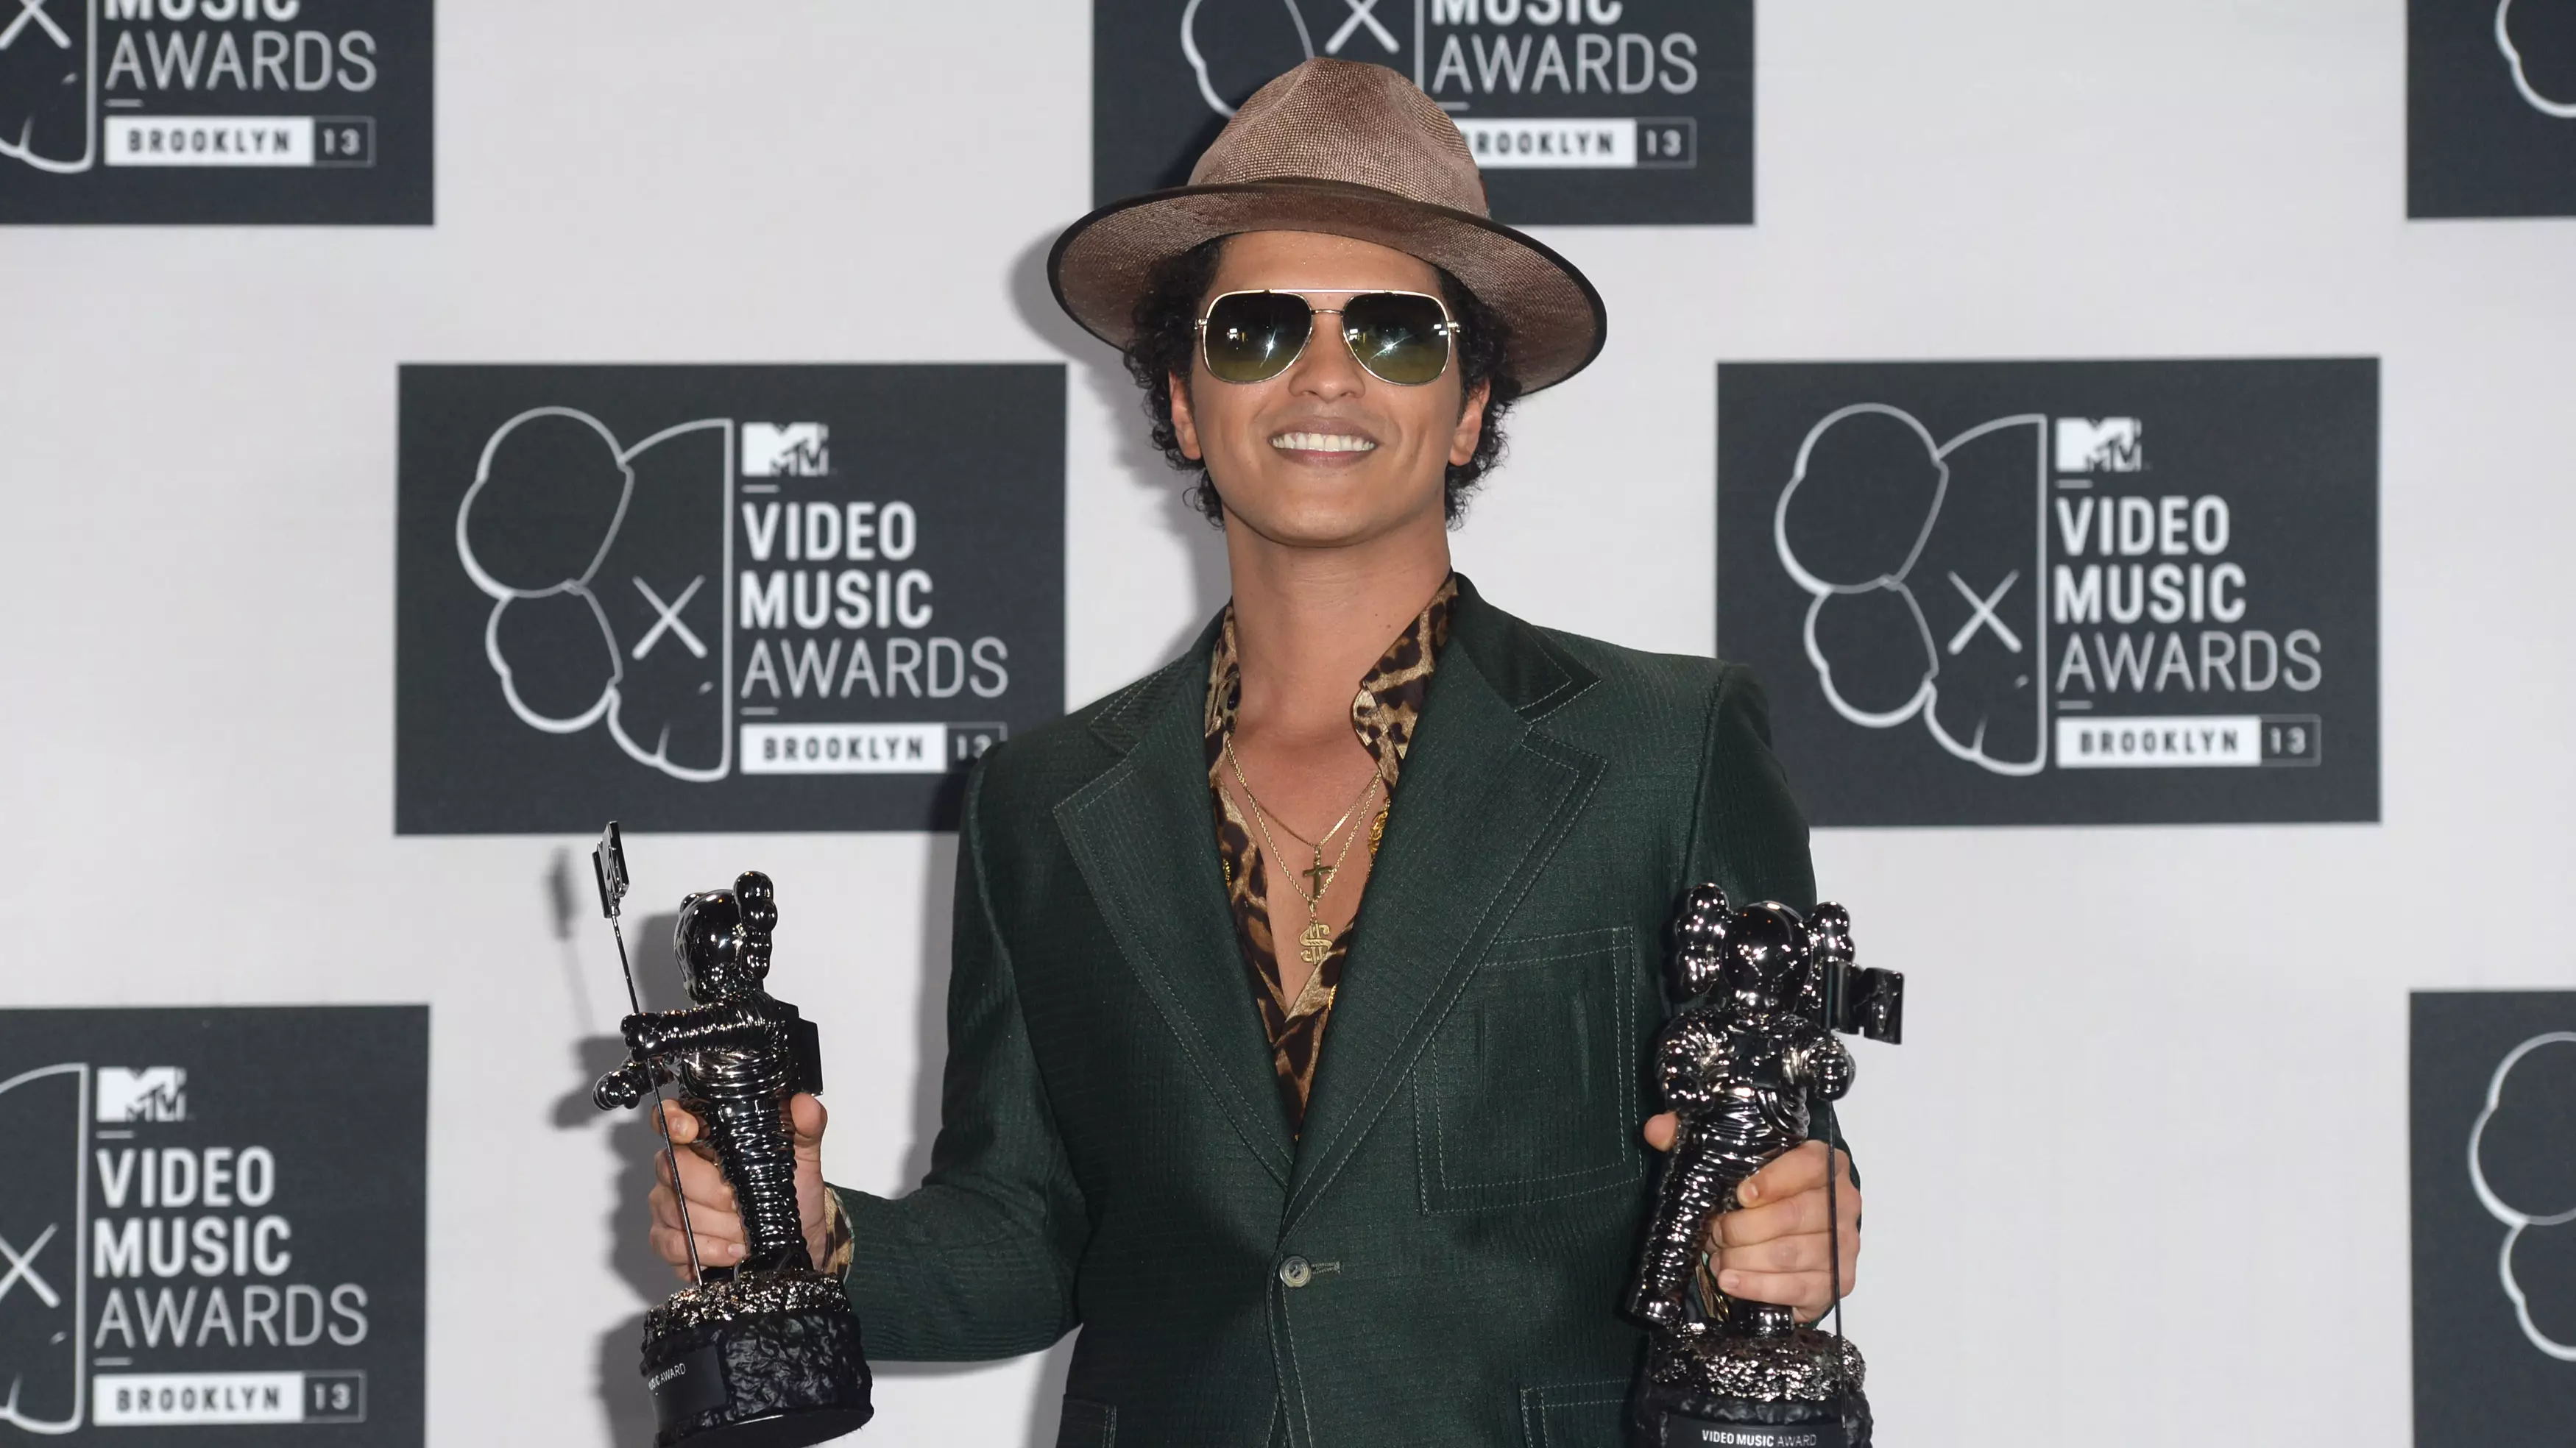 Bruno Mars And Mark Ronson Sued Over 'Uptown Funk' 